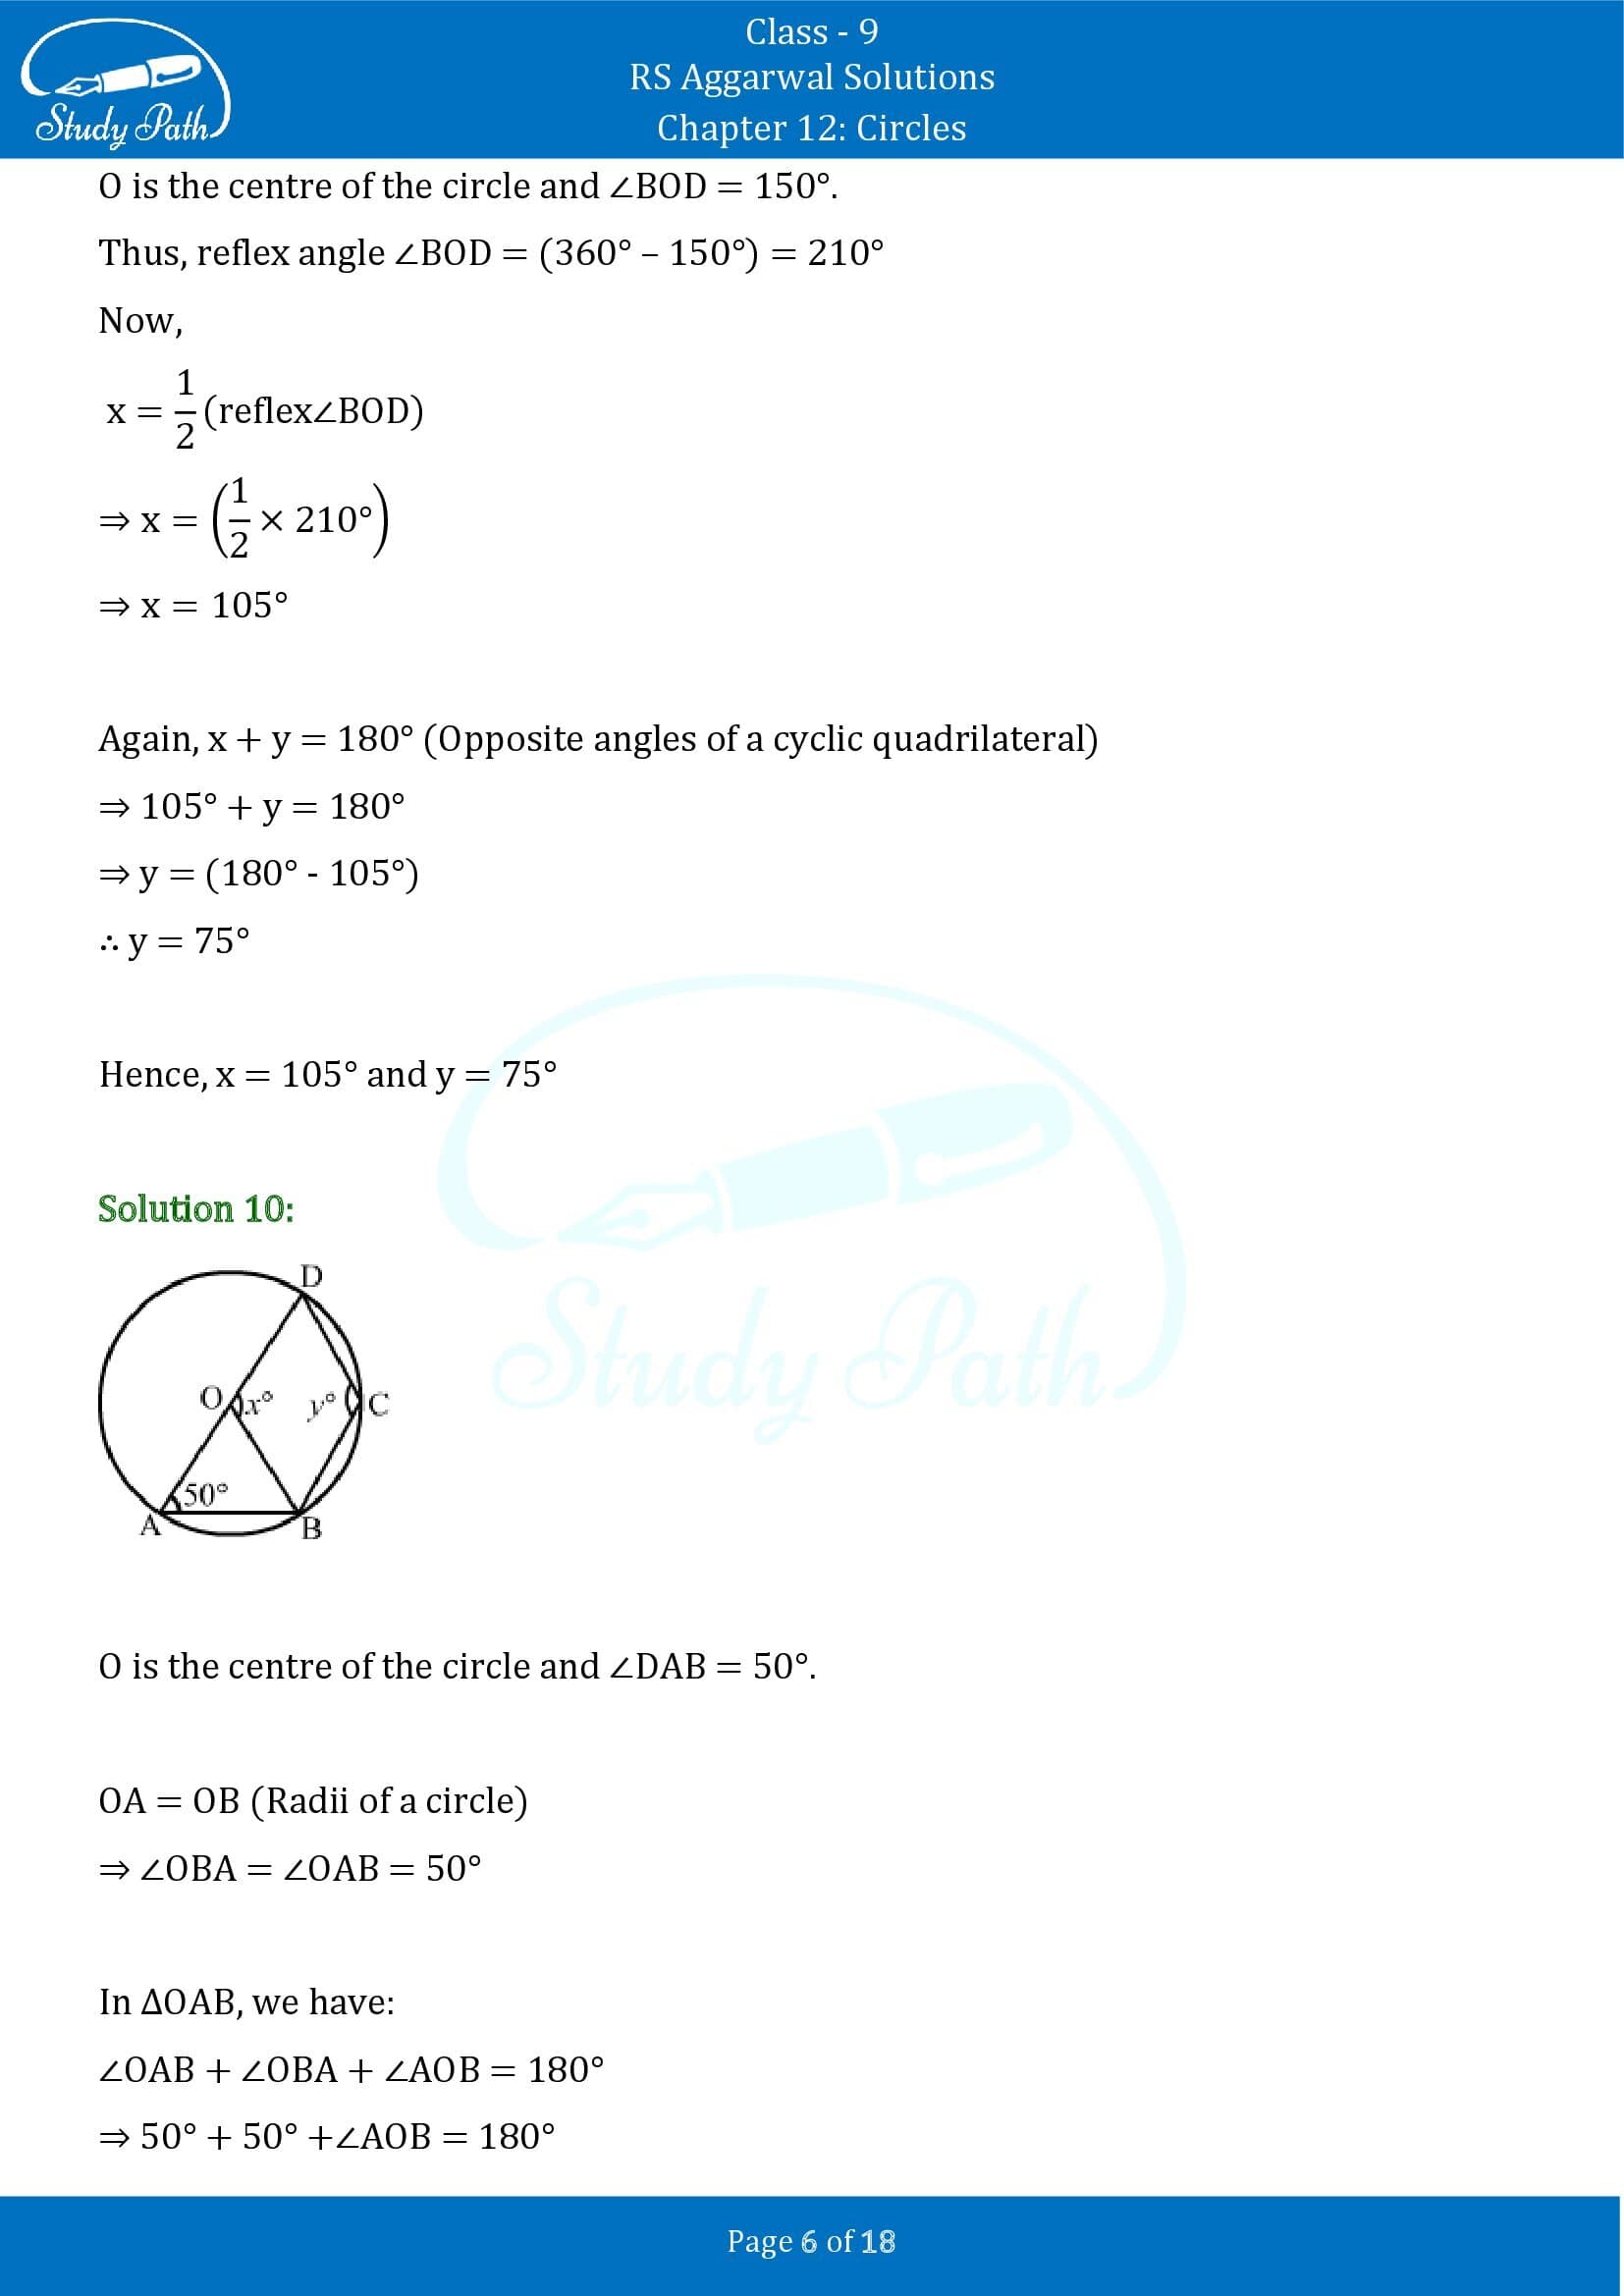 RS Aggarwal Solutions Class 9 Chapter 12 Circles Exercise 12C 00006